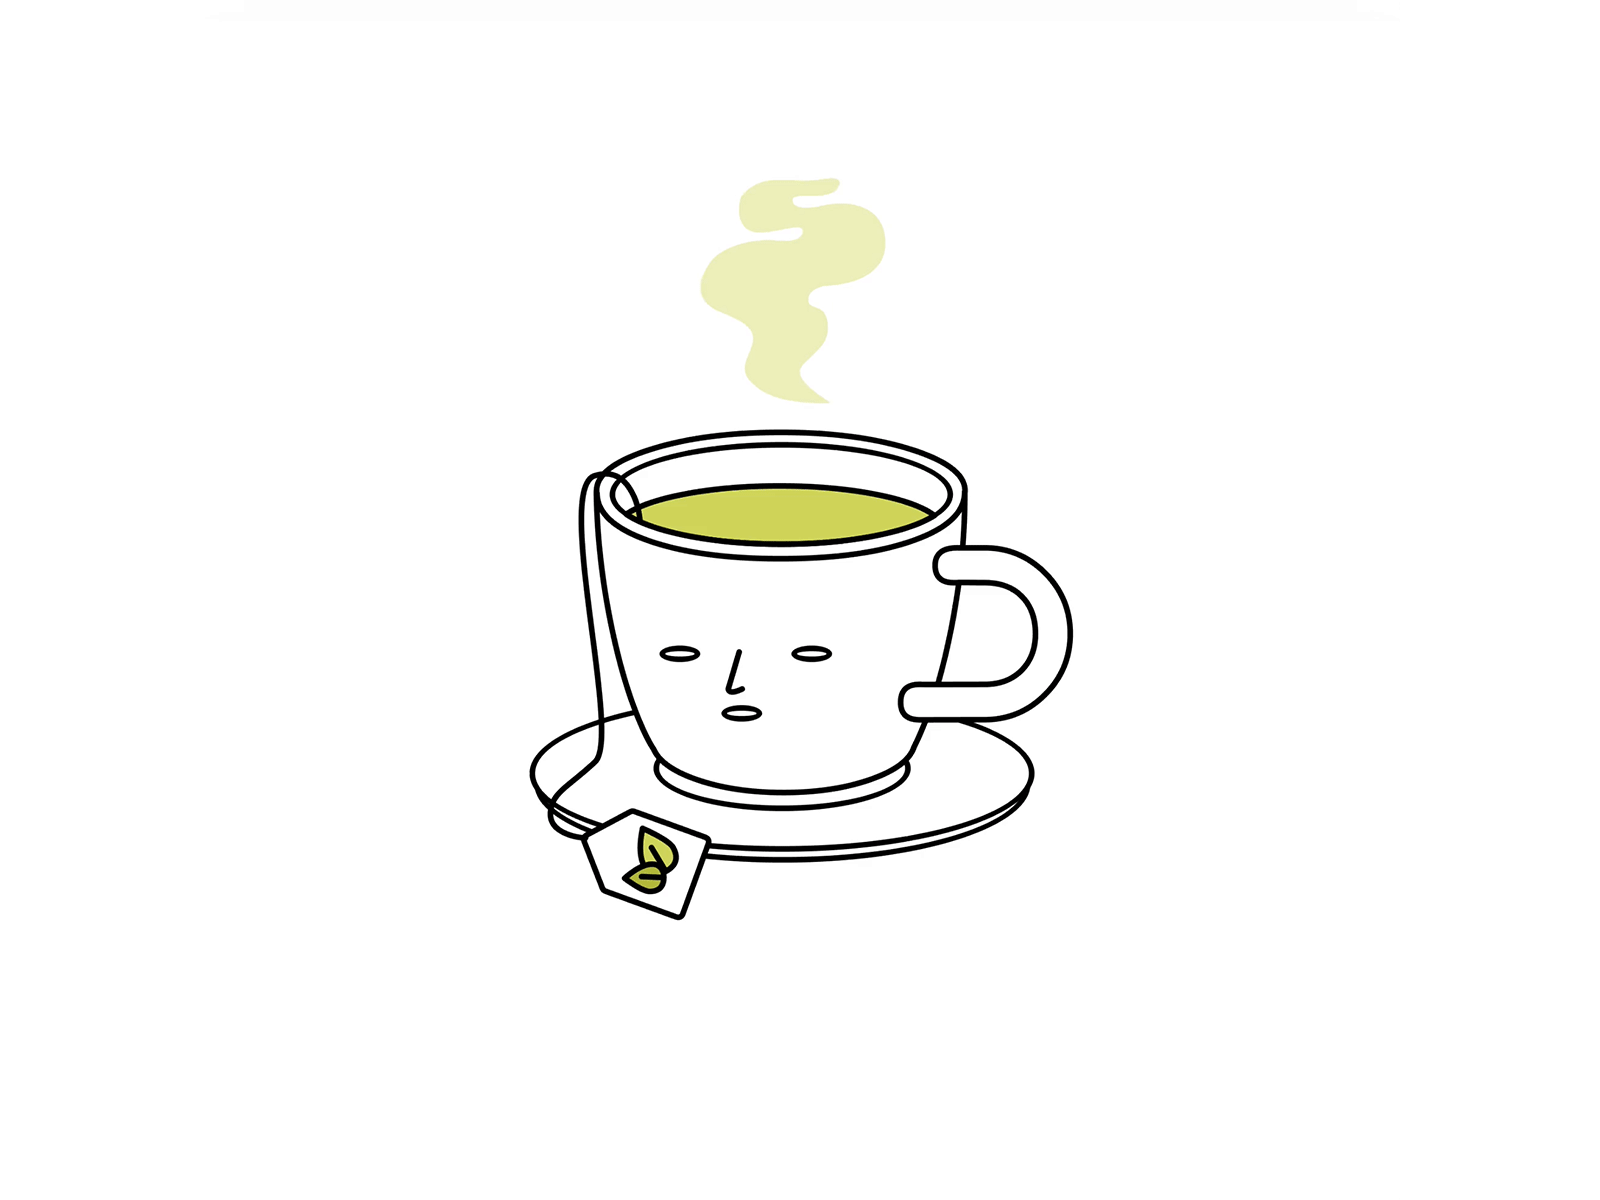 A cup of tea by Ivonne Audeves on Dribbble